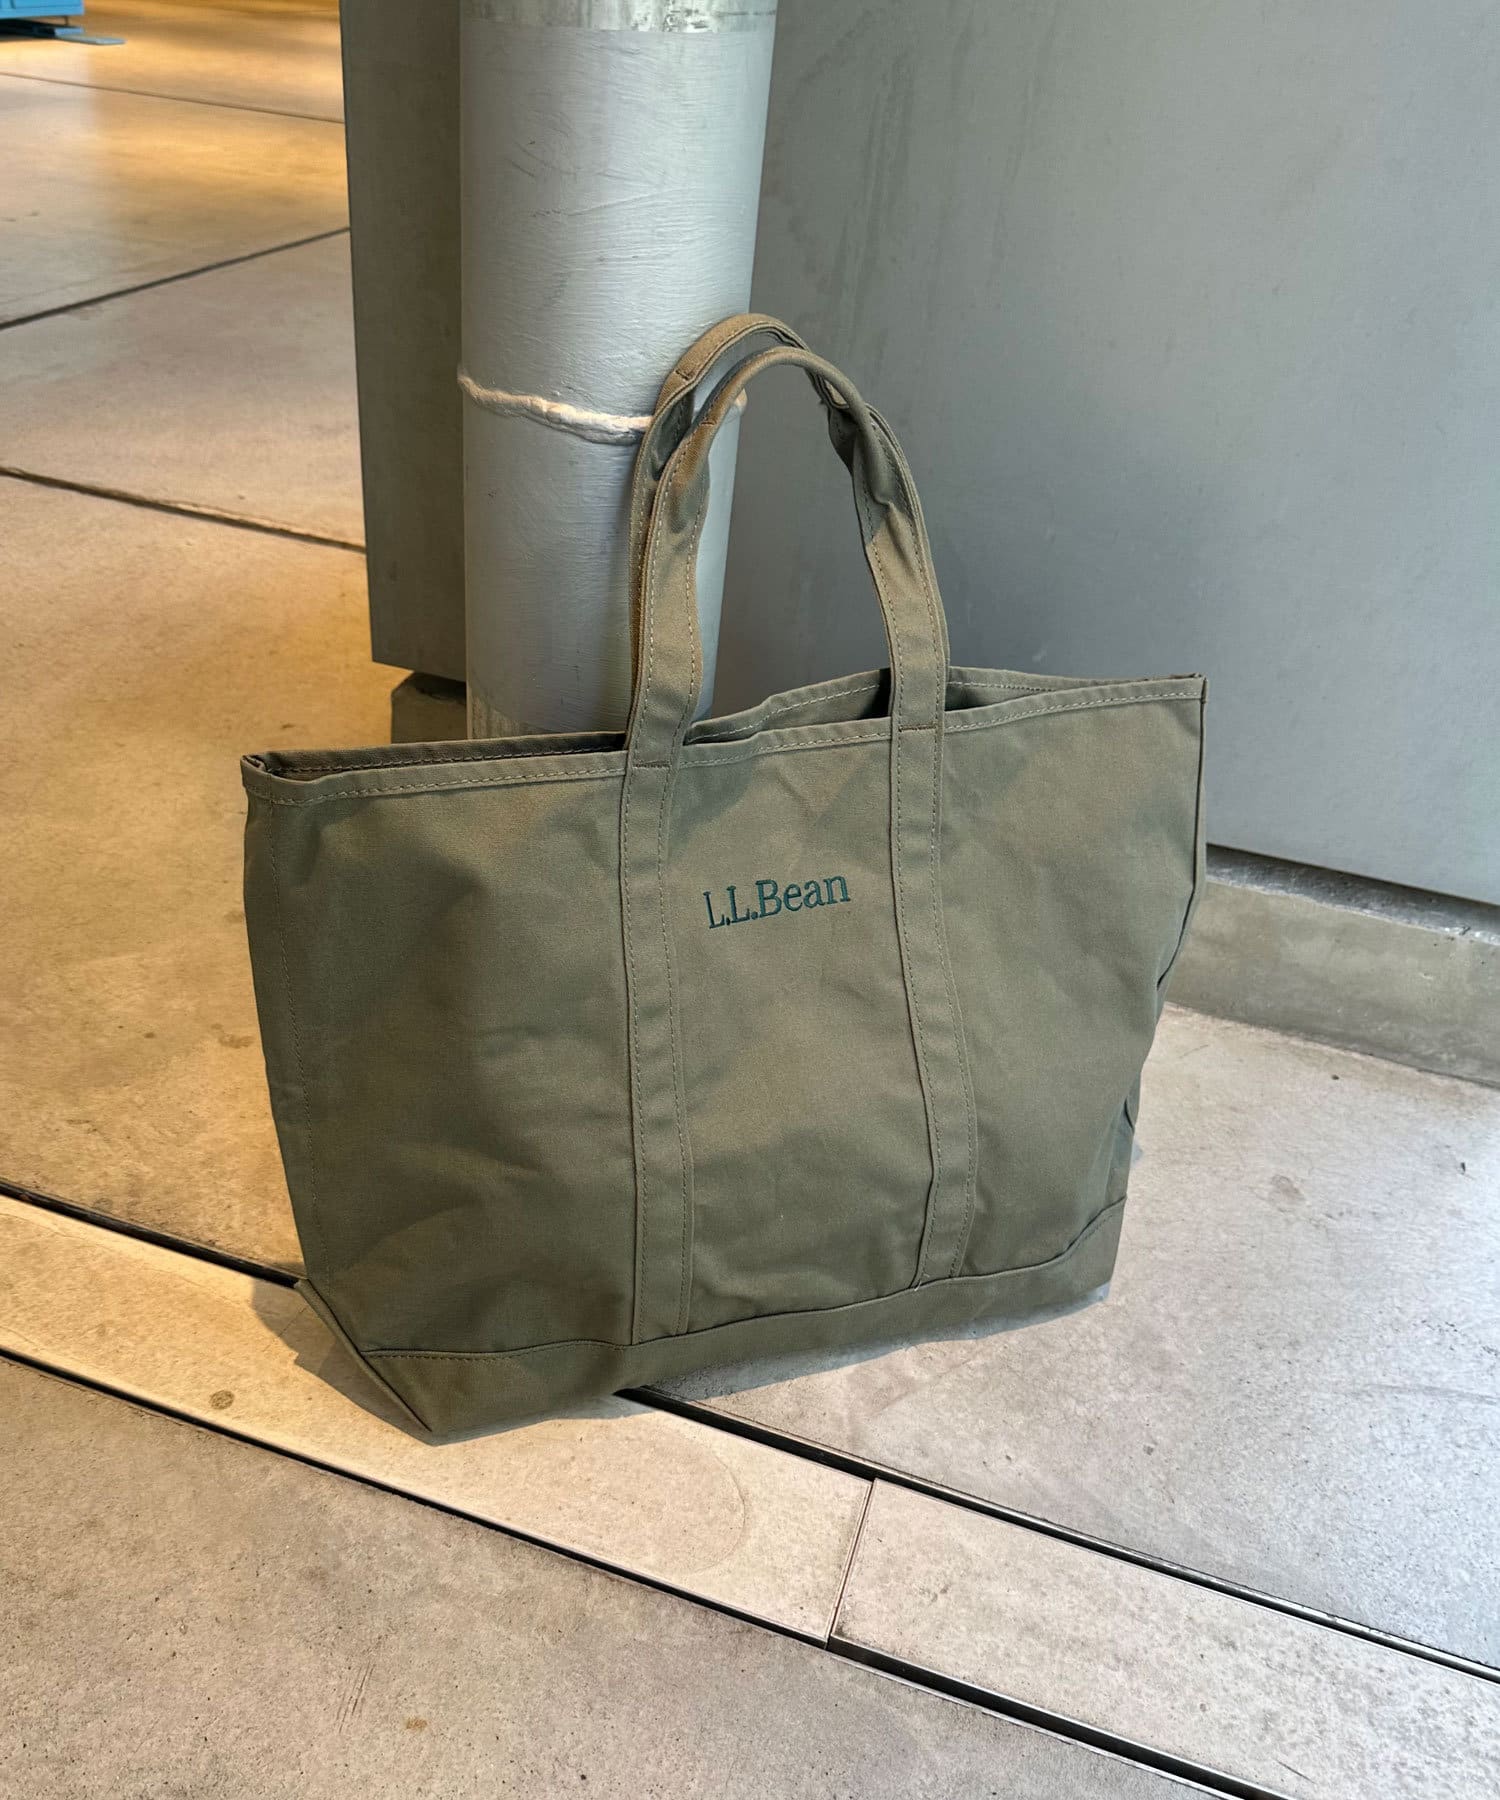 Kastane(カスタネ) 【L.L.Bean】GROCERY TOTE